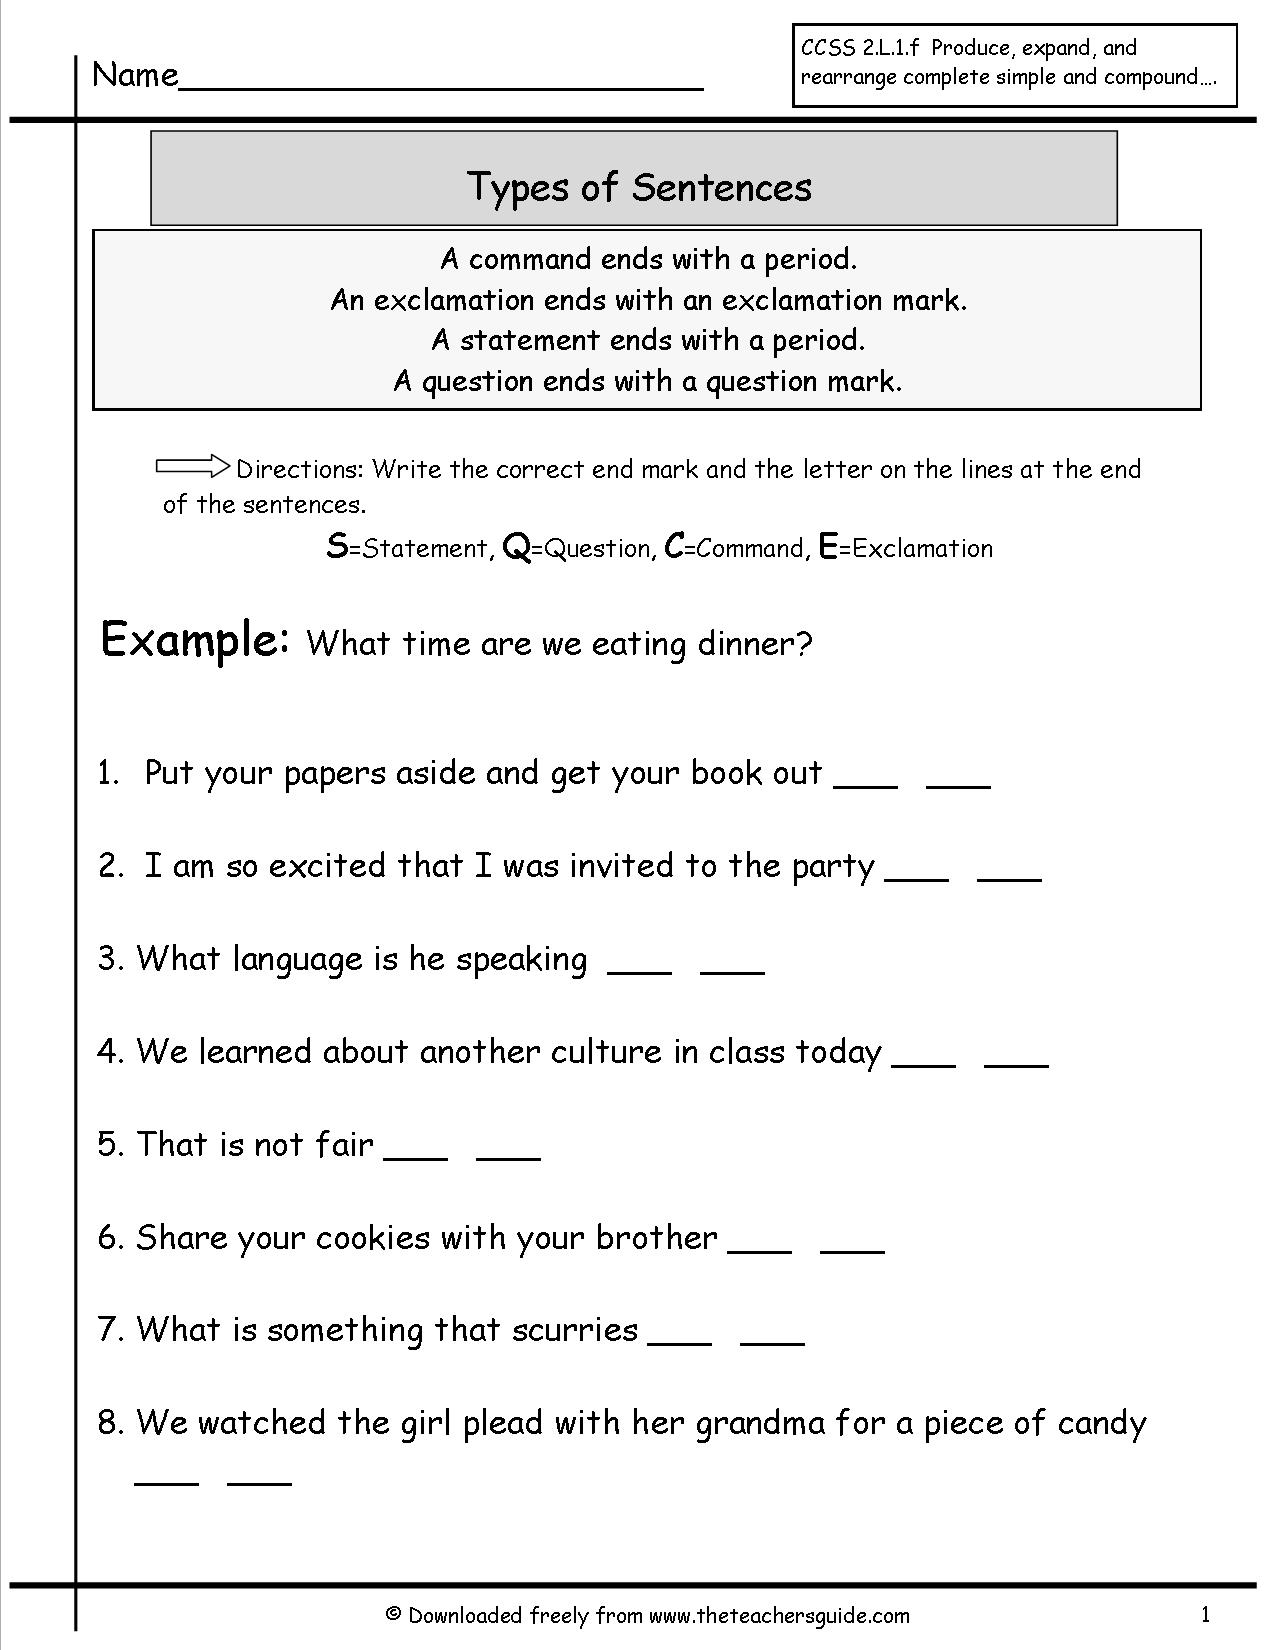 15 Best Images Of Identify Types Of Energy Worksheet Different Forms Of Energy Worksheets